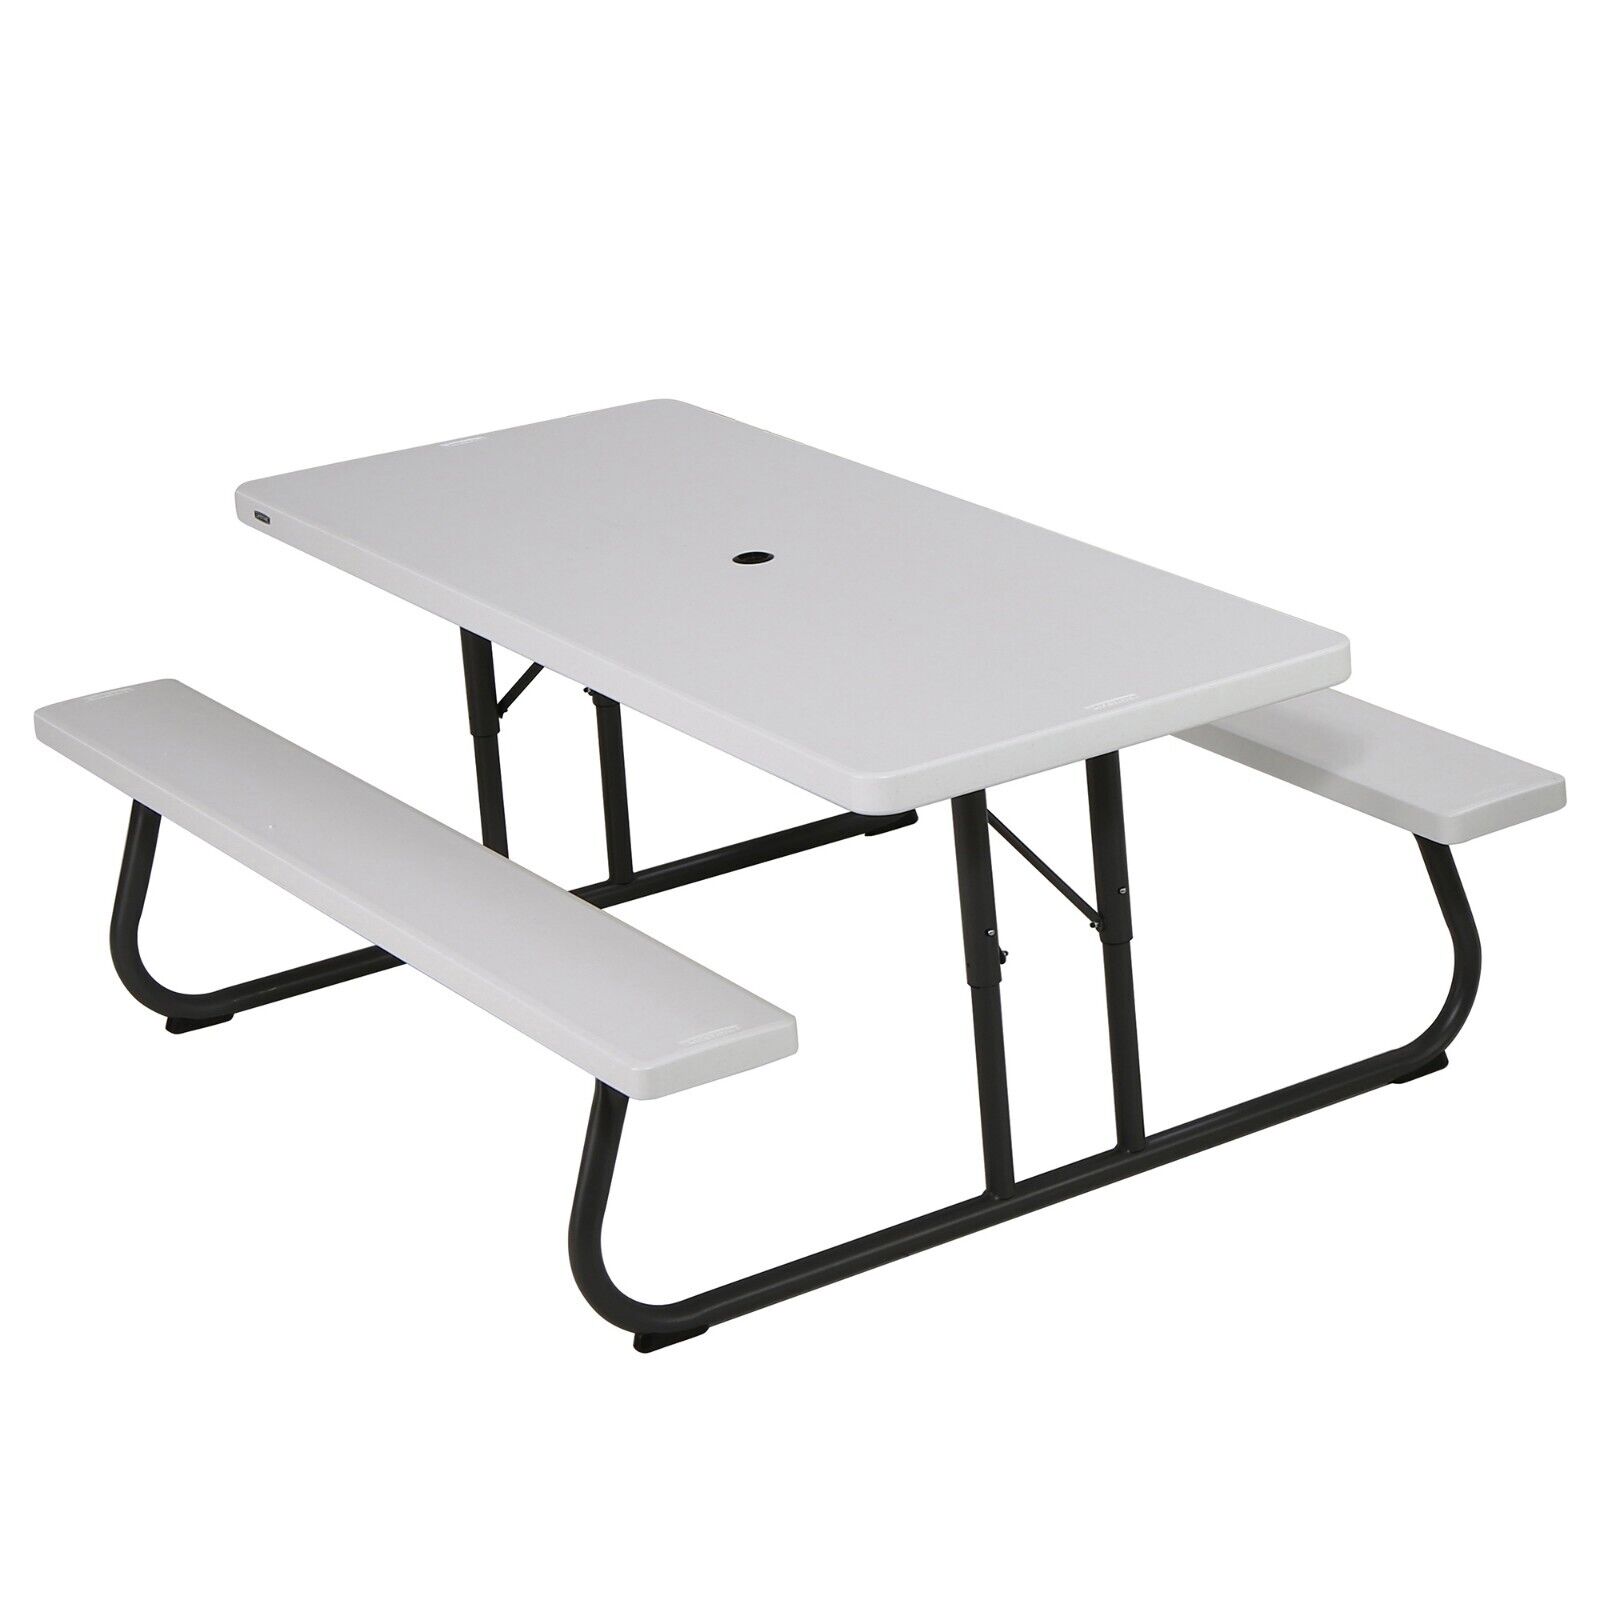 Lifetime 6 Foot Folding Outdoor Picnic Table - 80215